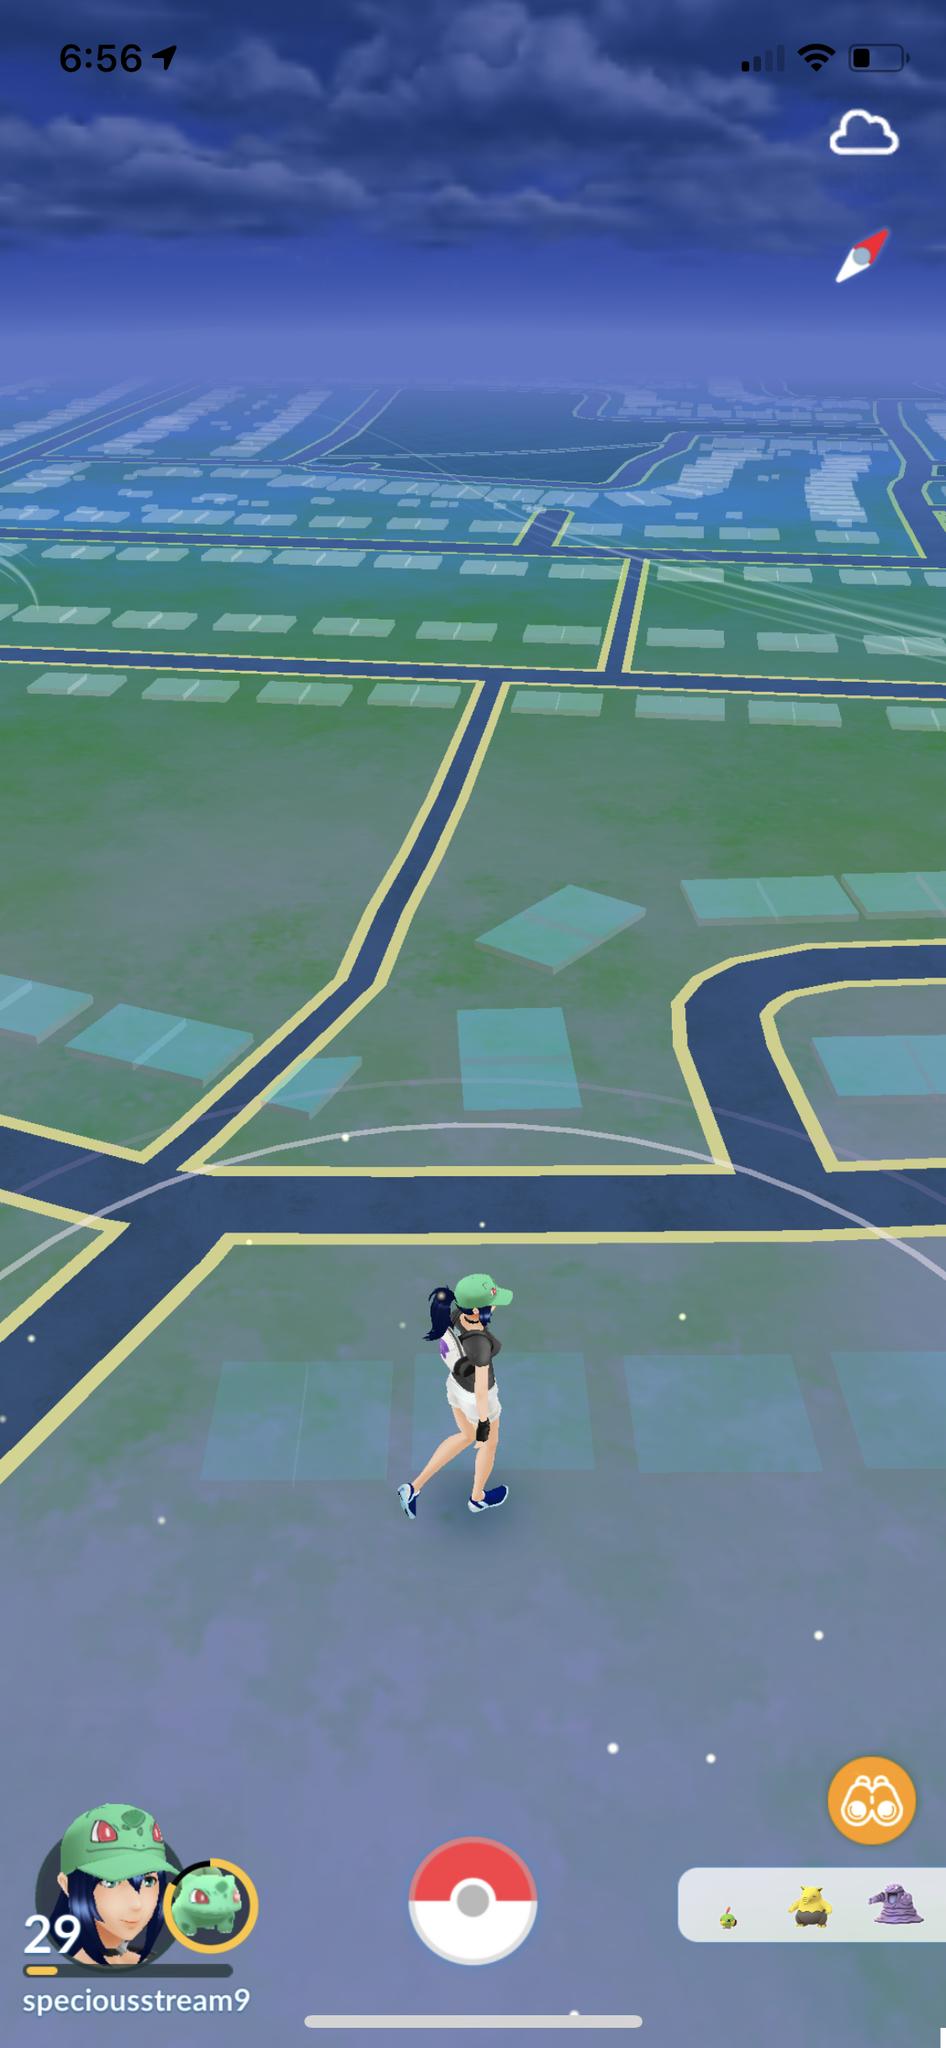 How to connect pokemon go to switch